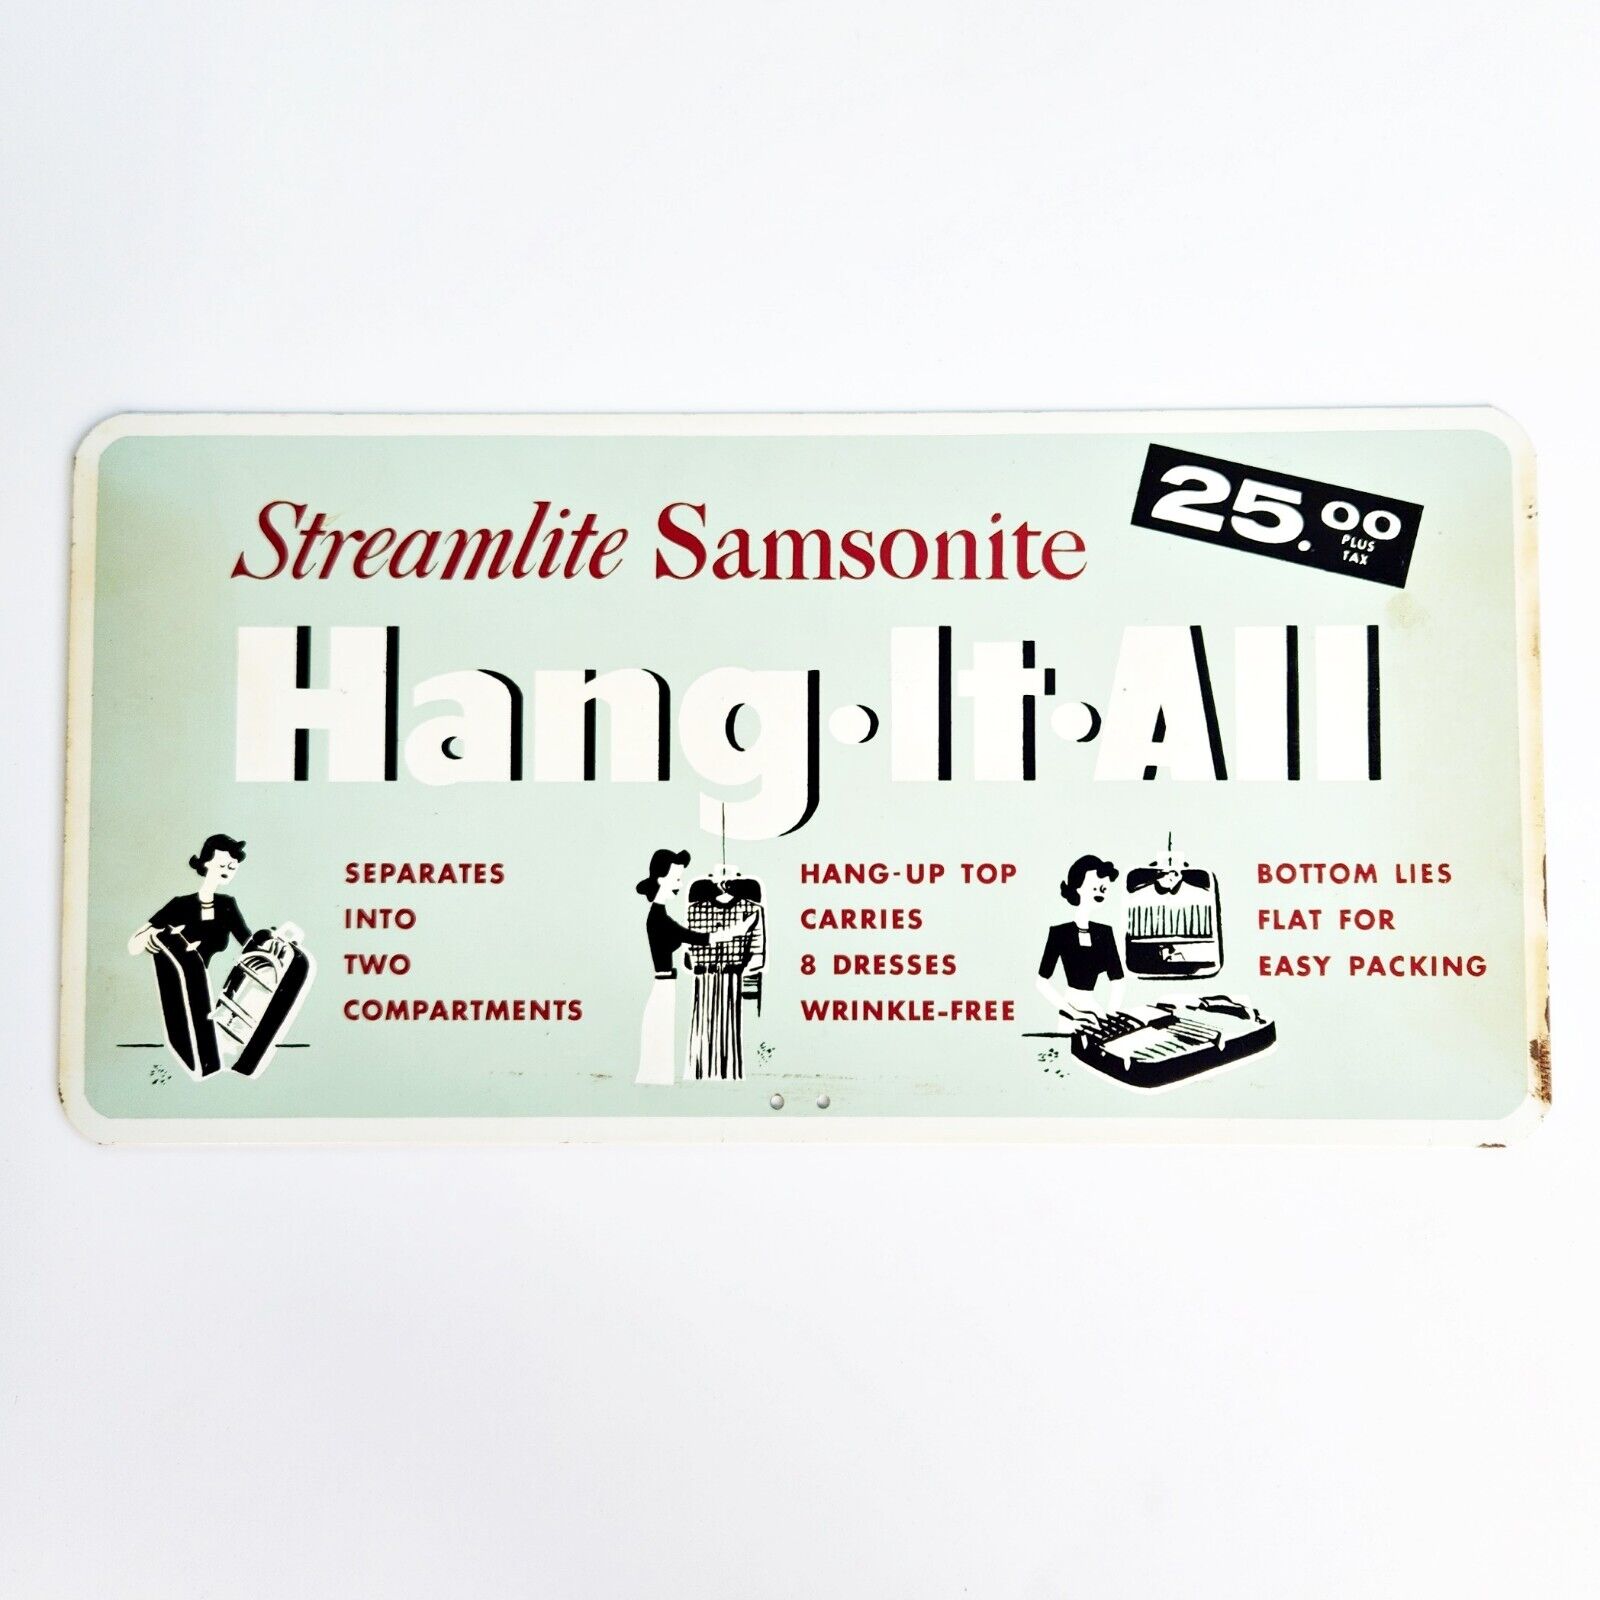 RARE 1950s Vintage Streamlite SAMSONITE Advertising Sign Suitcase DOUBLE SIDED